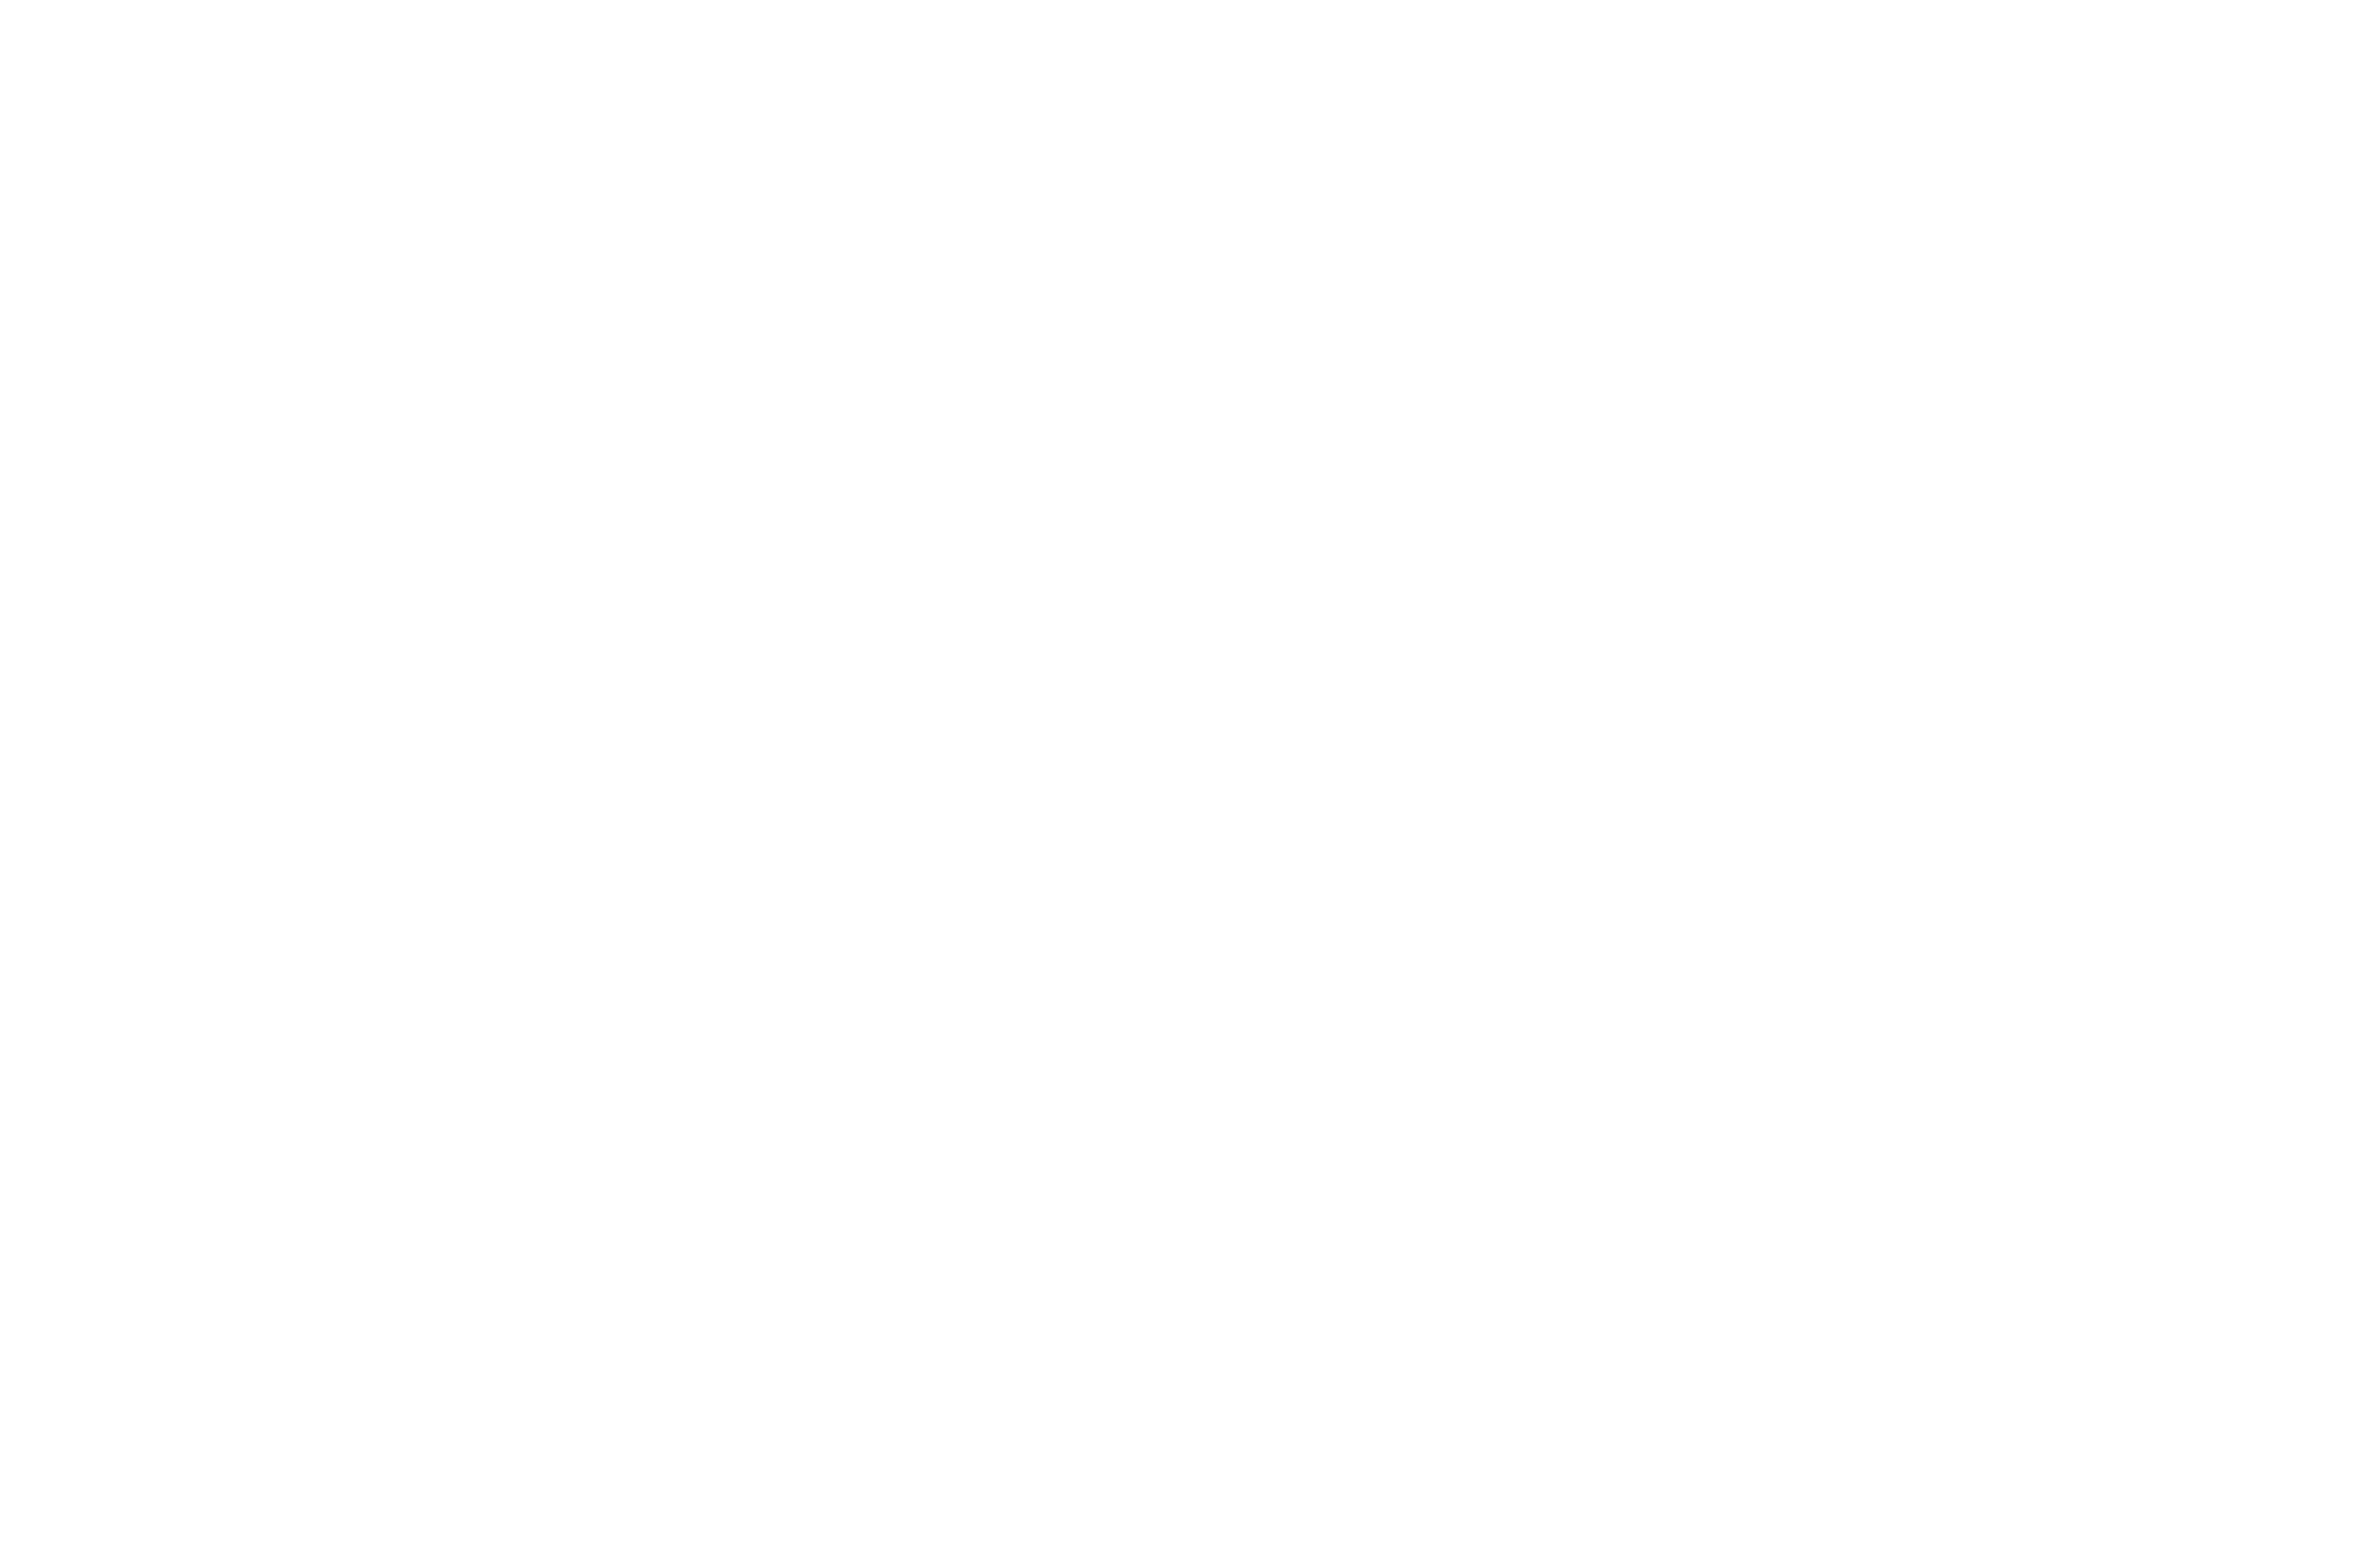 Bull and Graph Image